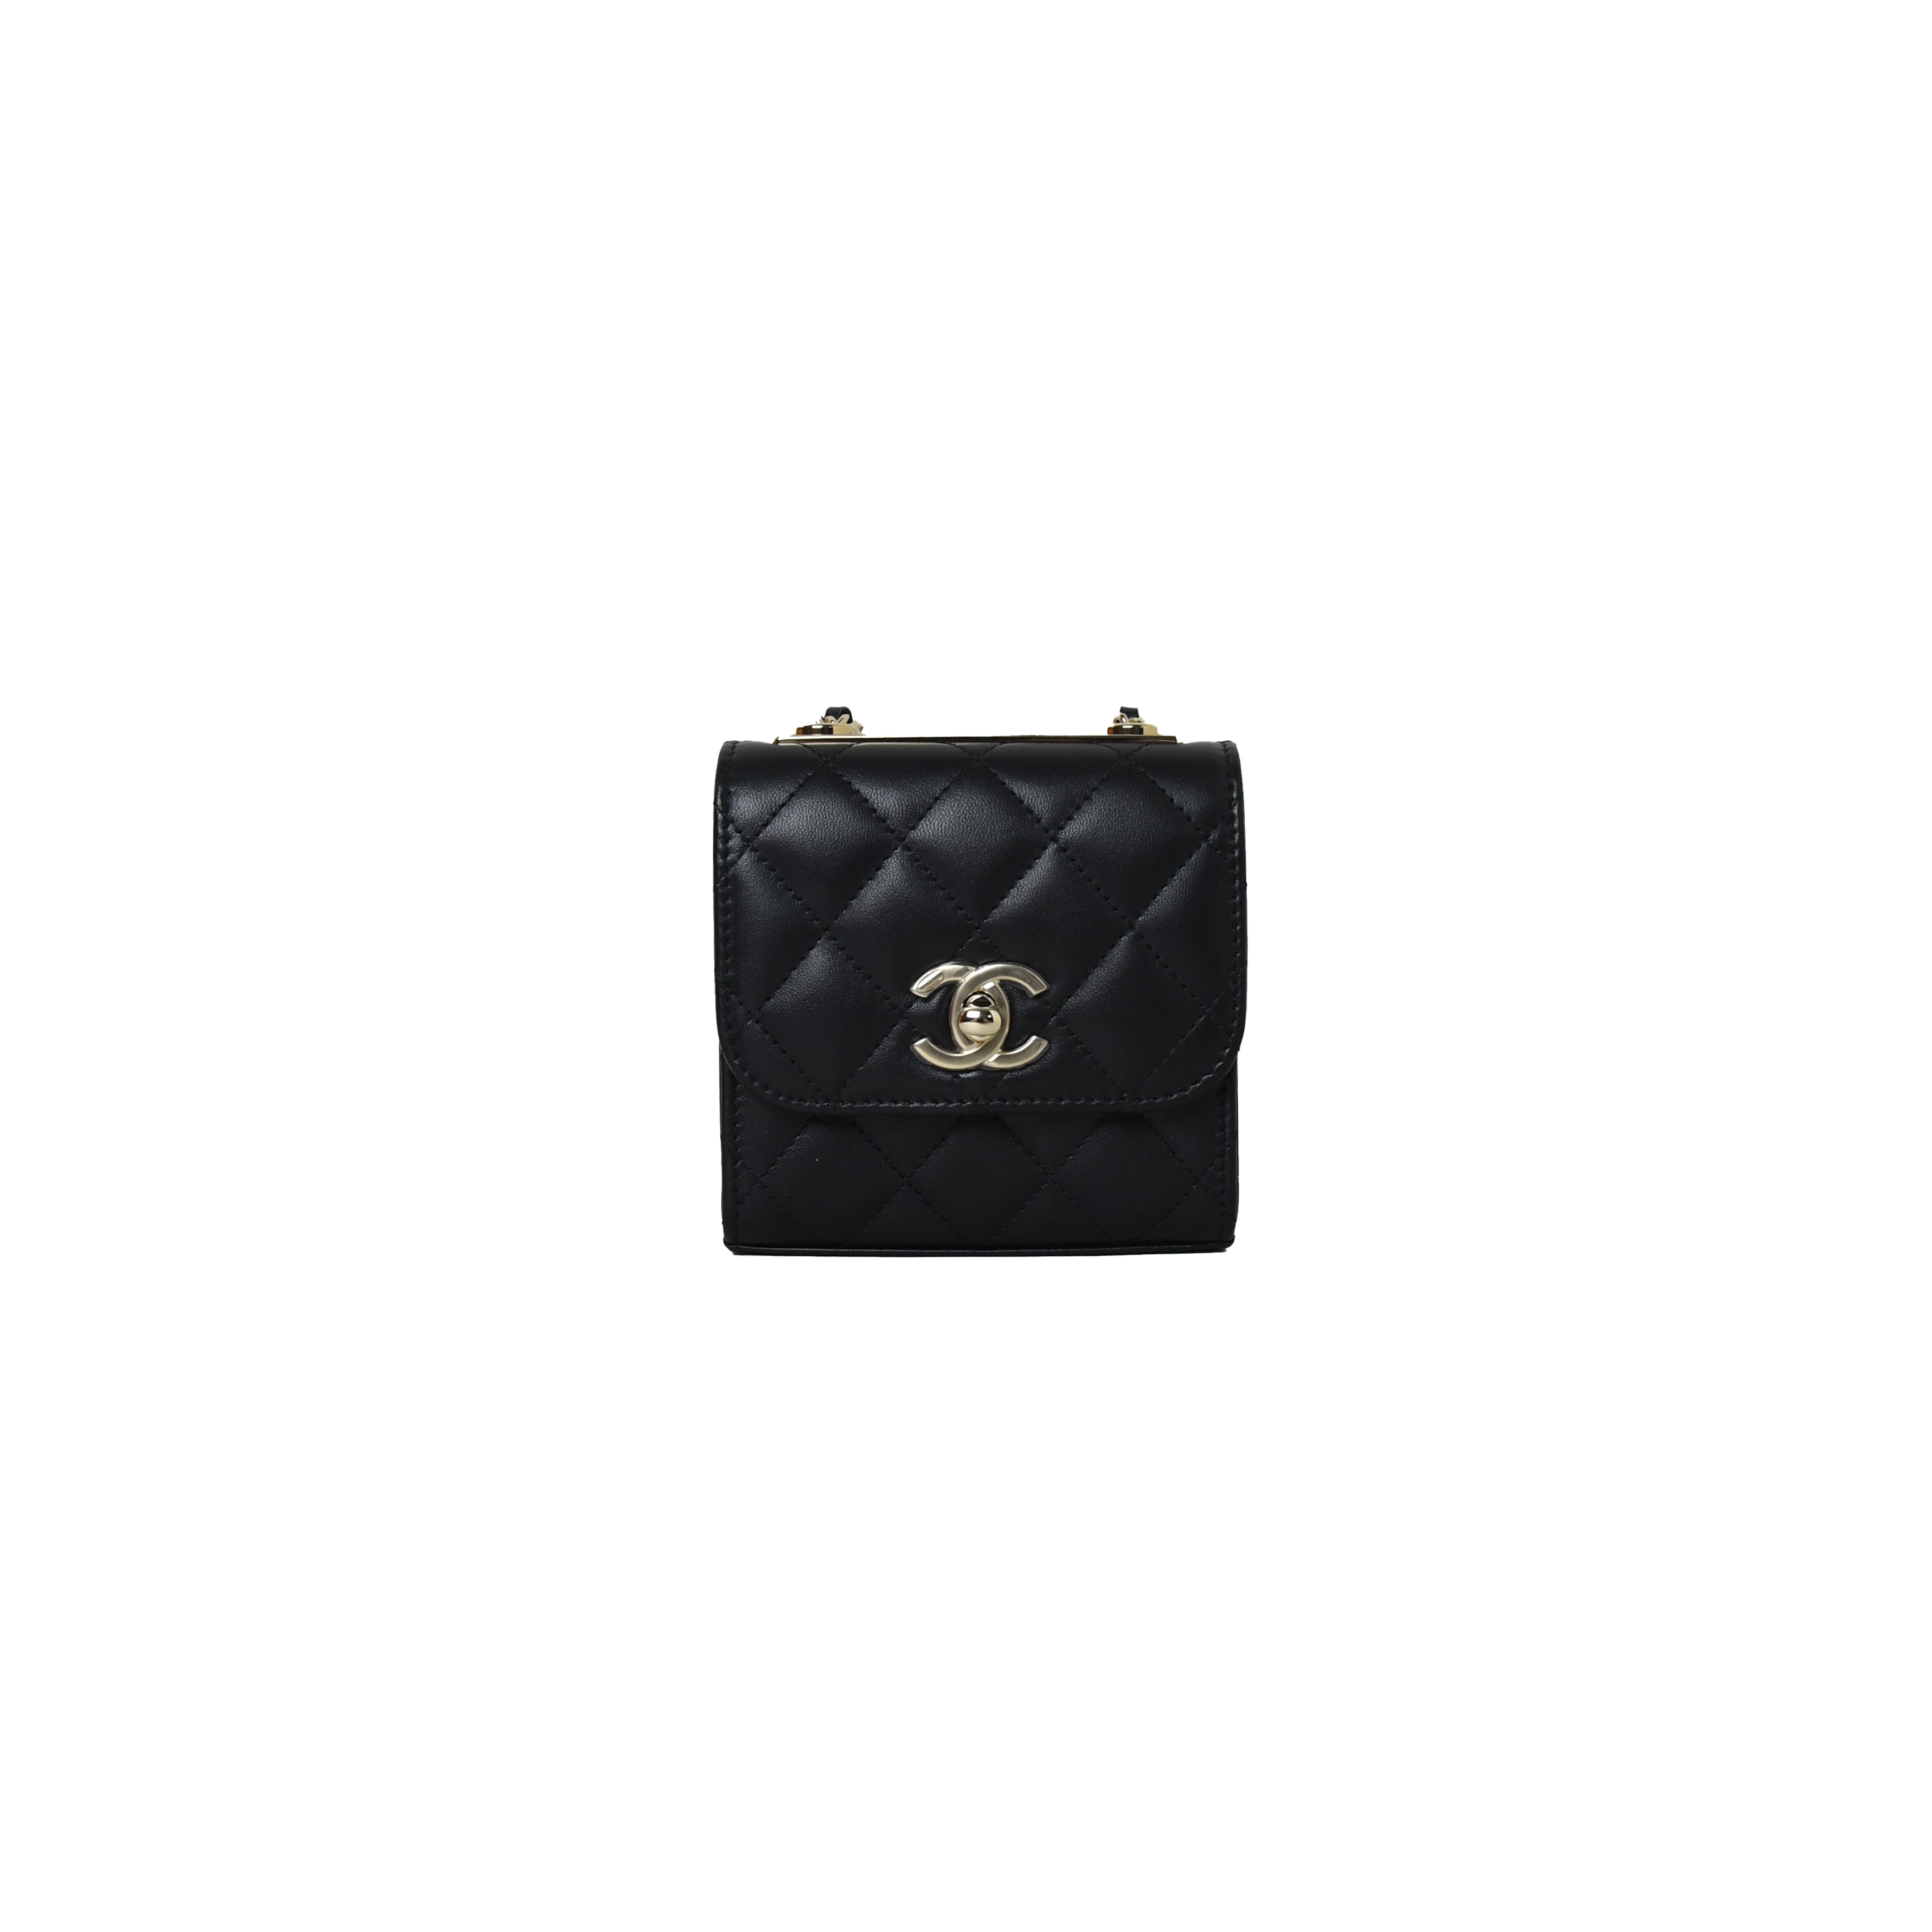 Chanel Mini Top Handle, Black Lambskin Leather, Champagne Gold Hardware,  New in Box